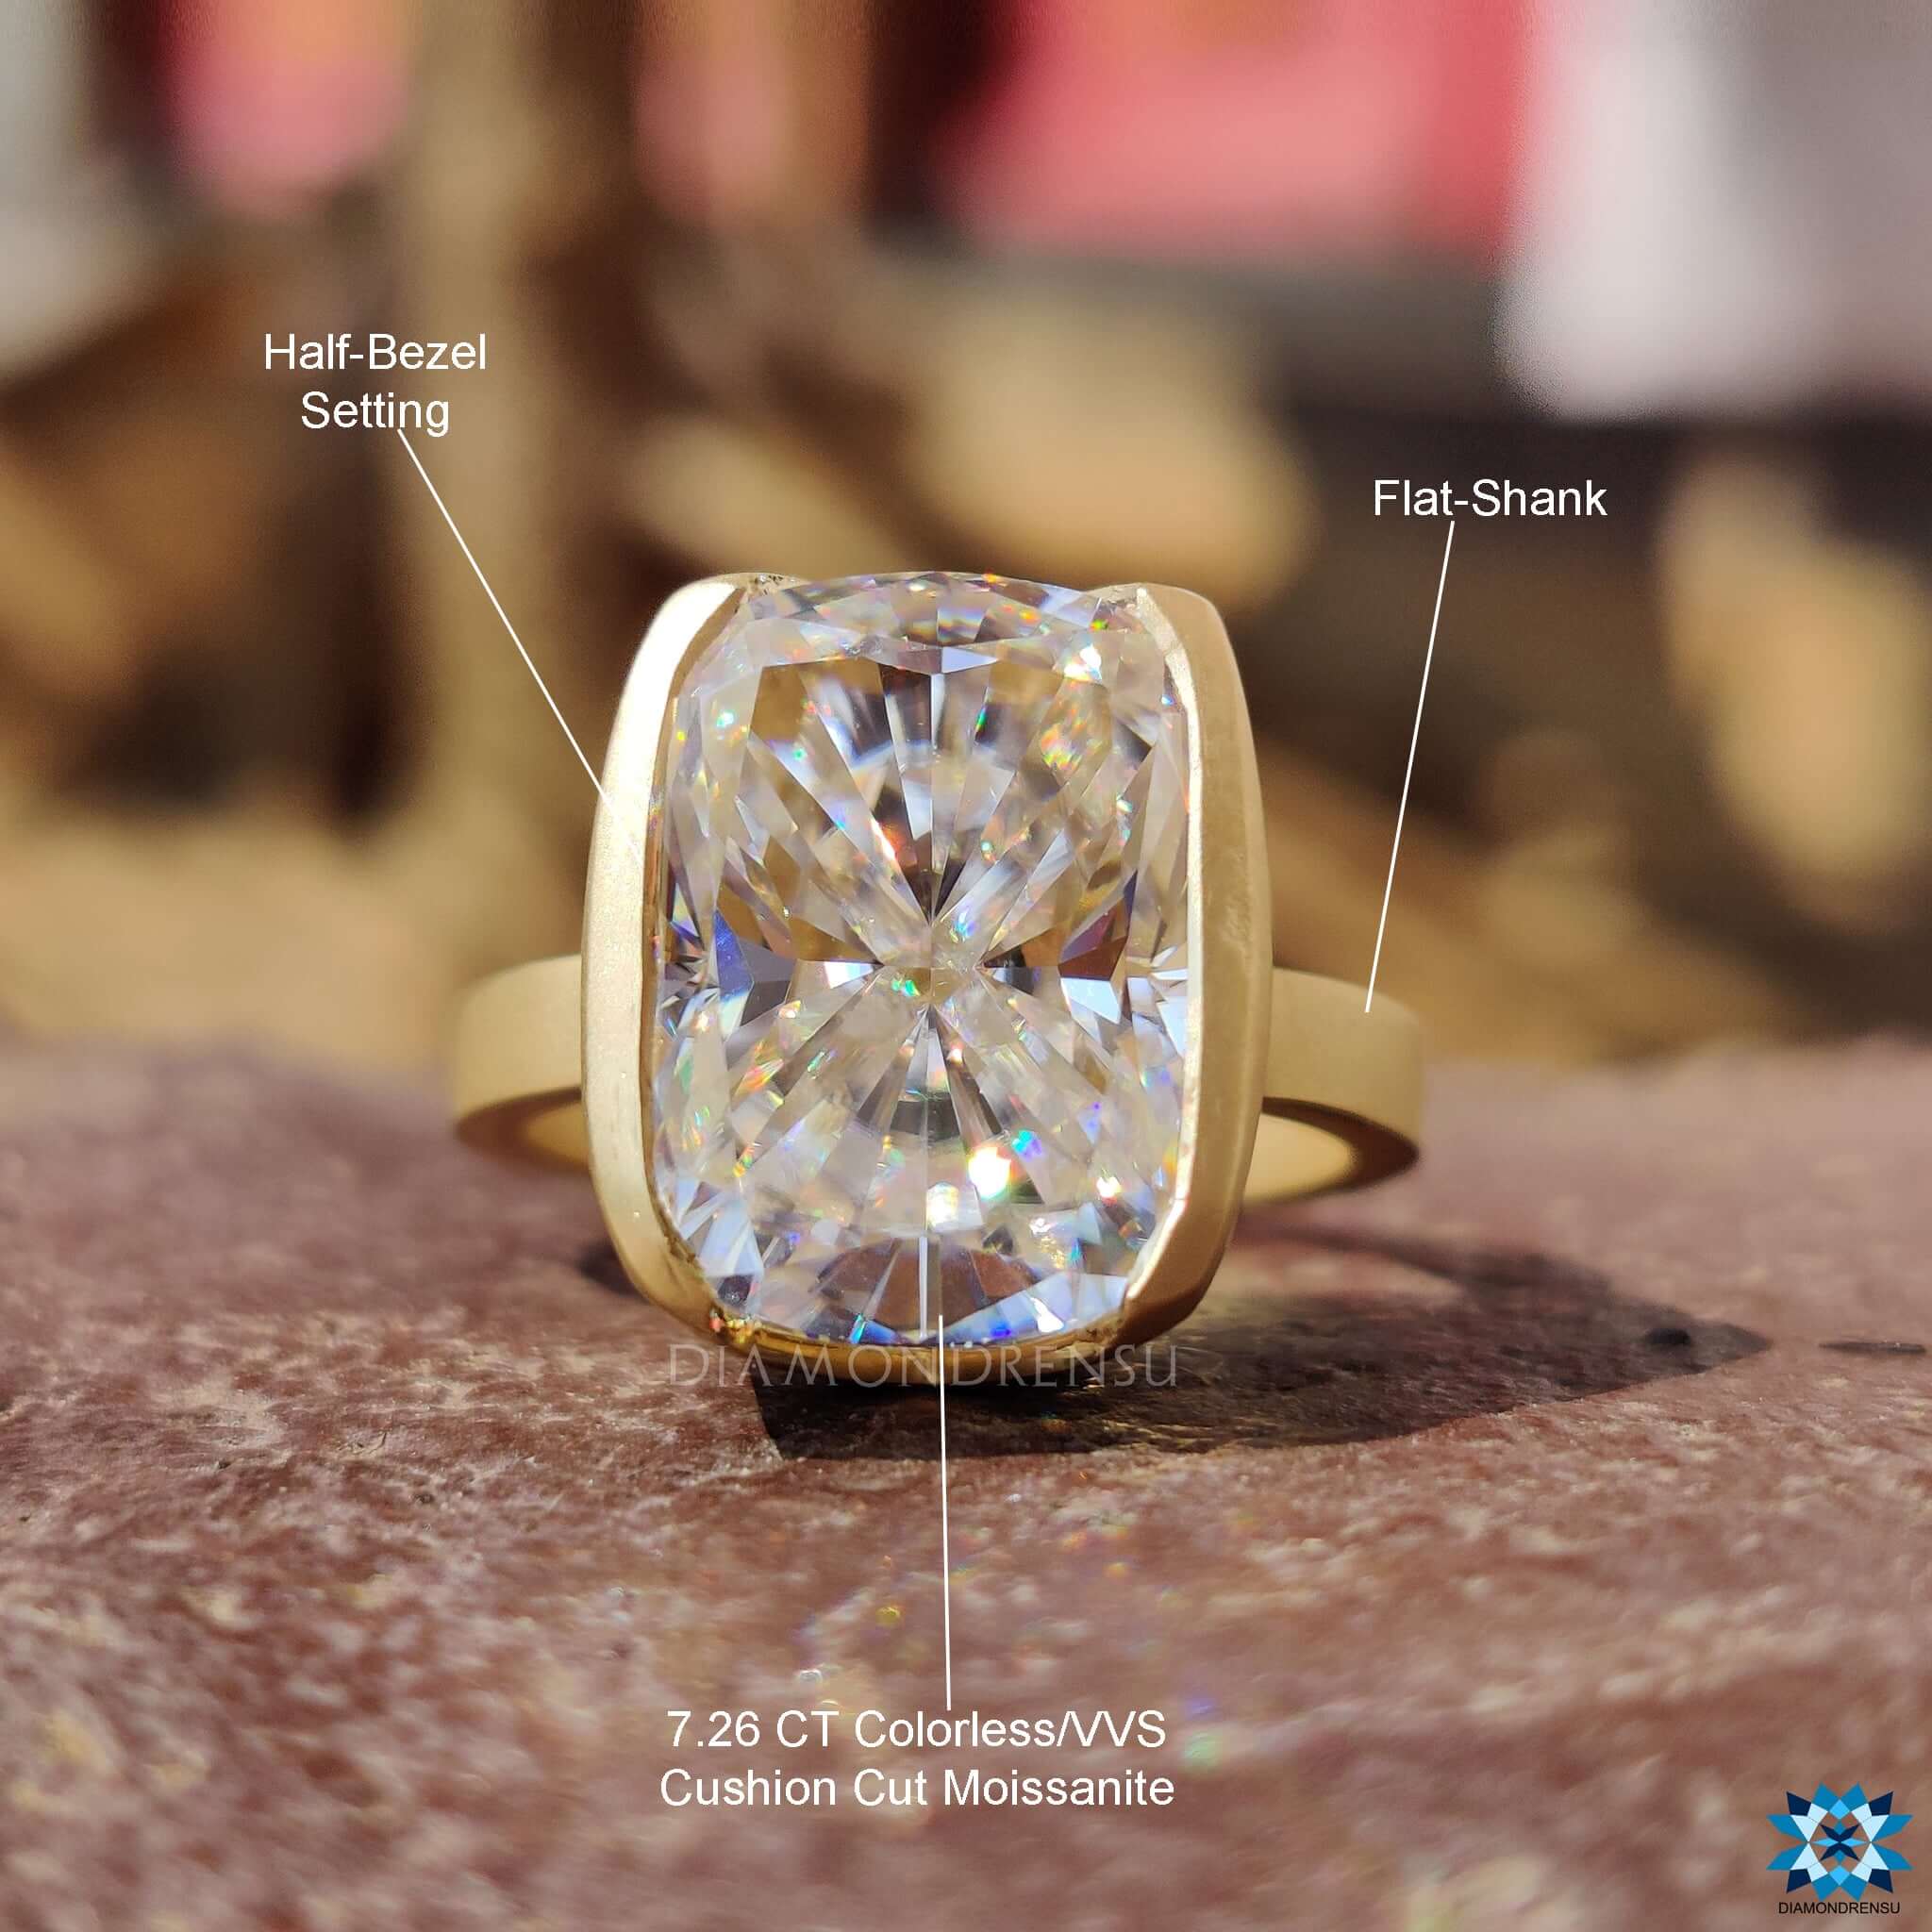 Half-Bezel Channel-Set Engagement Ring Setting | Moijey Fine Jewelry and  Diamonds